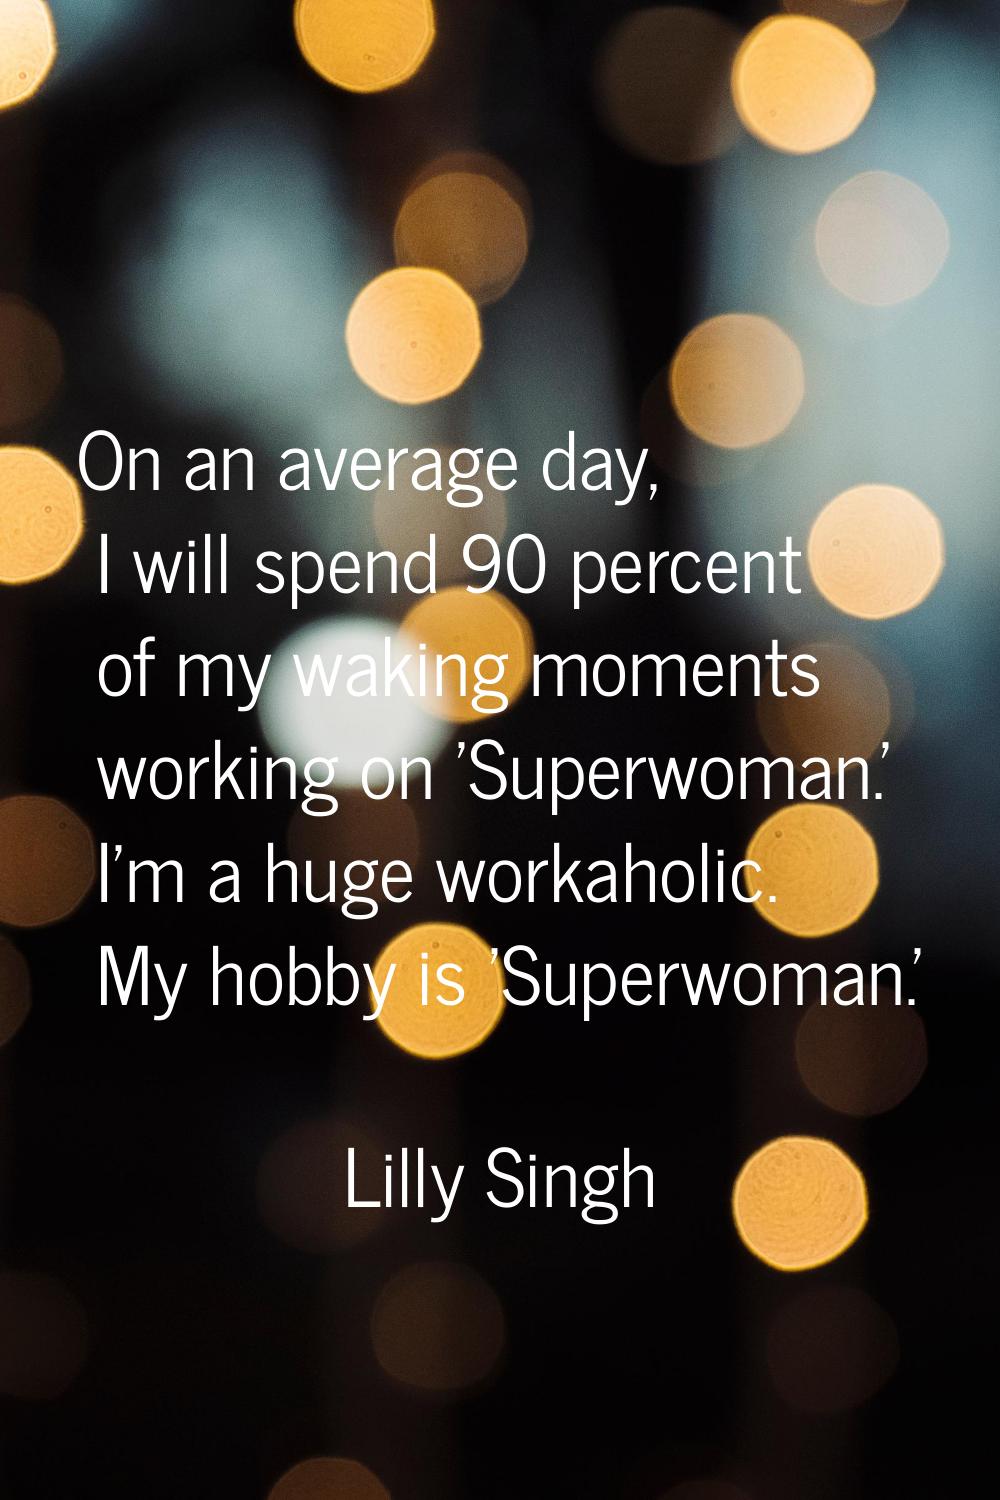 On an average day, I will spend 90 percent of my waking moments working on 'Superwoman.' I'm a huge